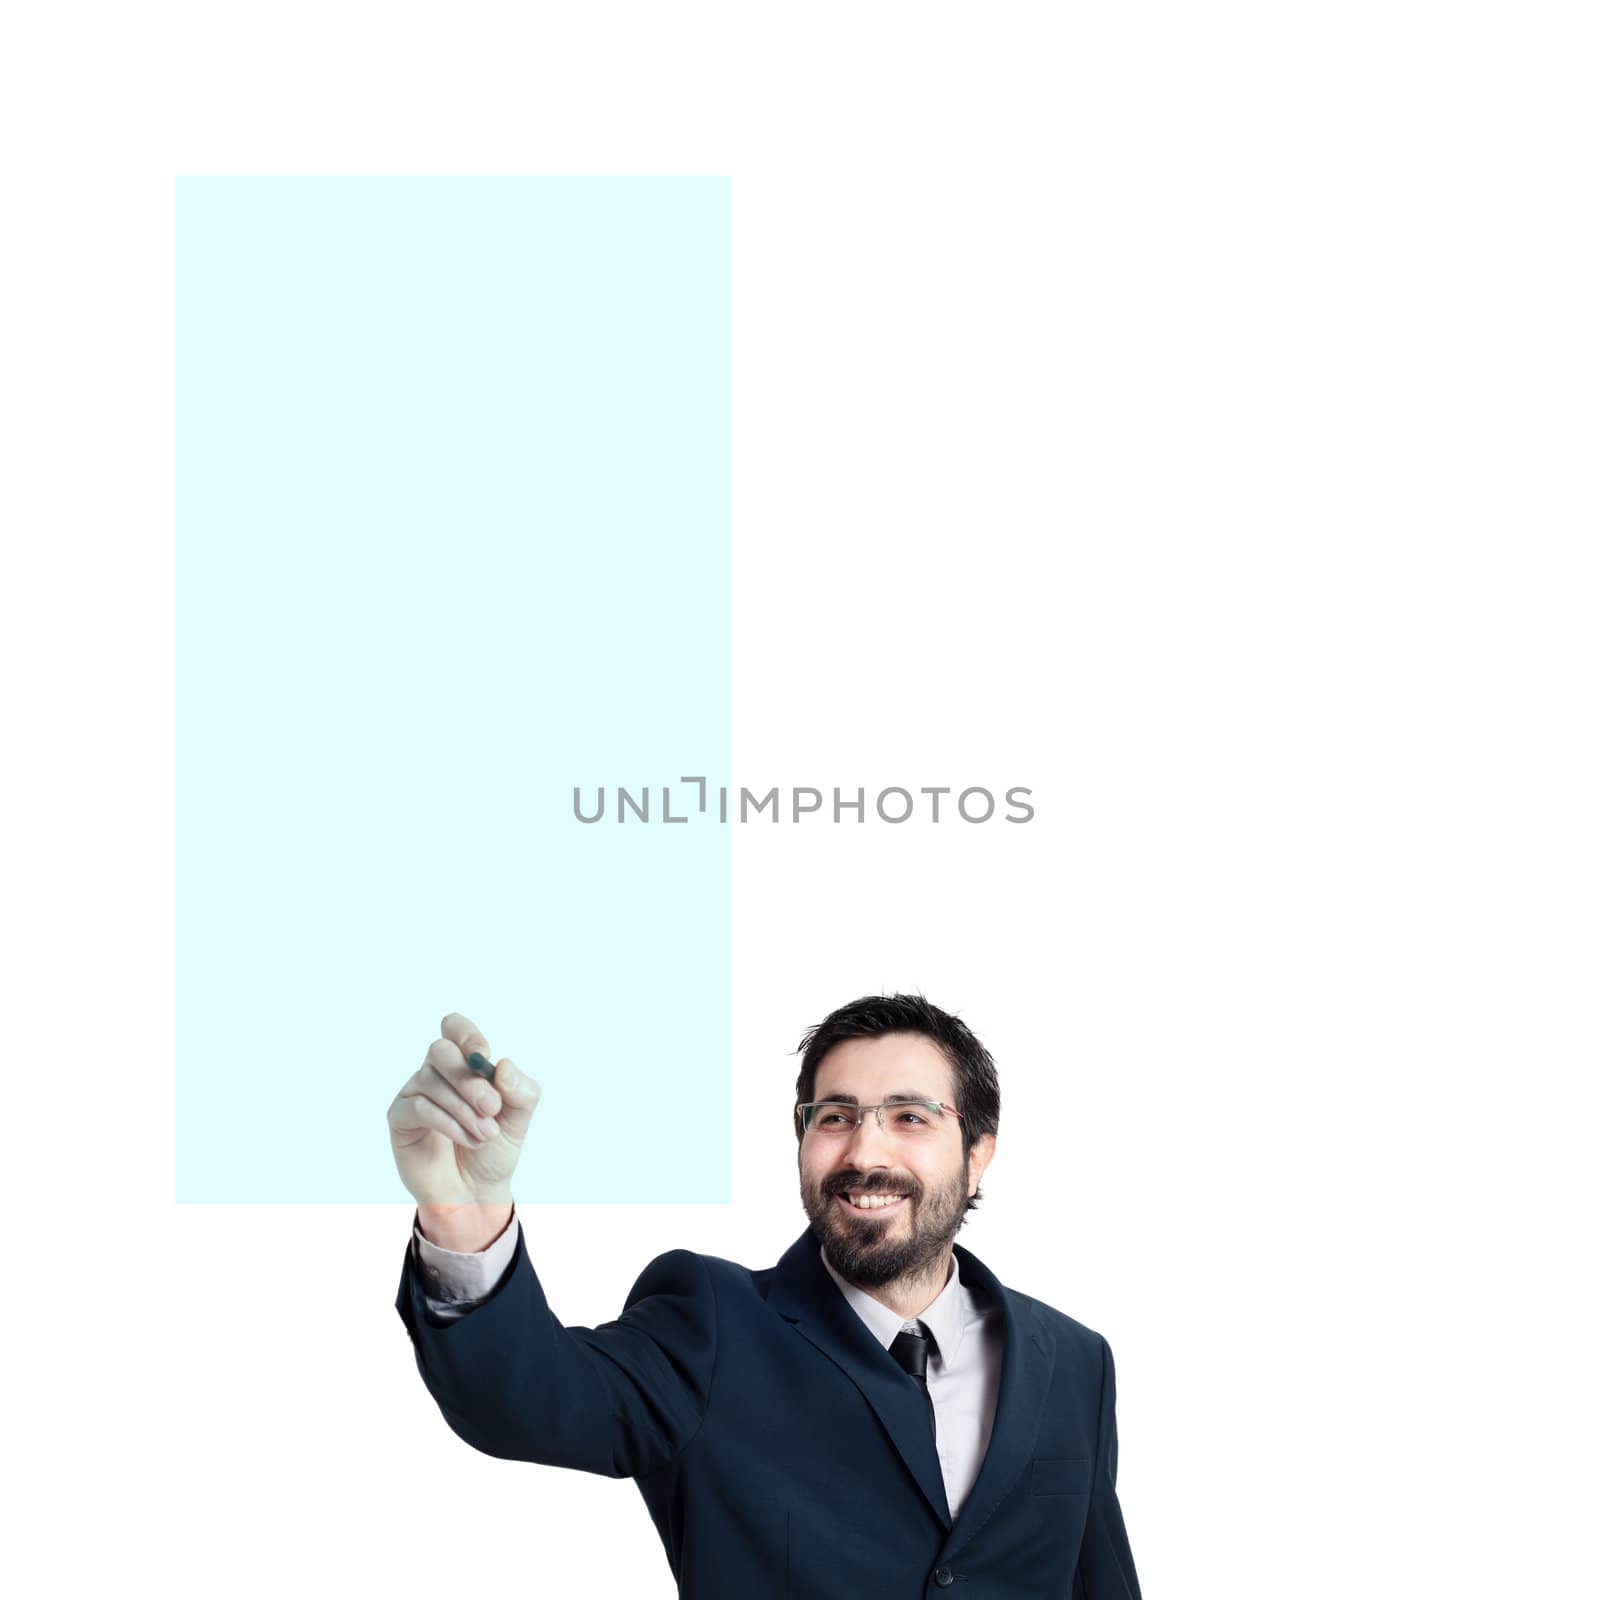 business man writing on imaginary screen on white background